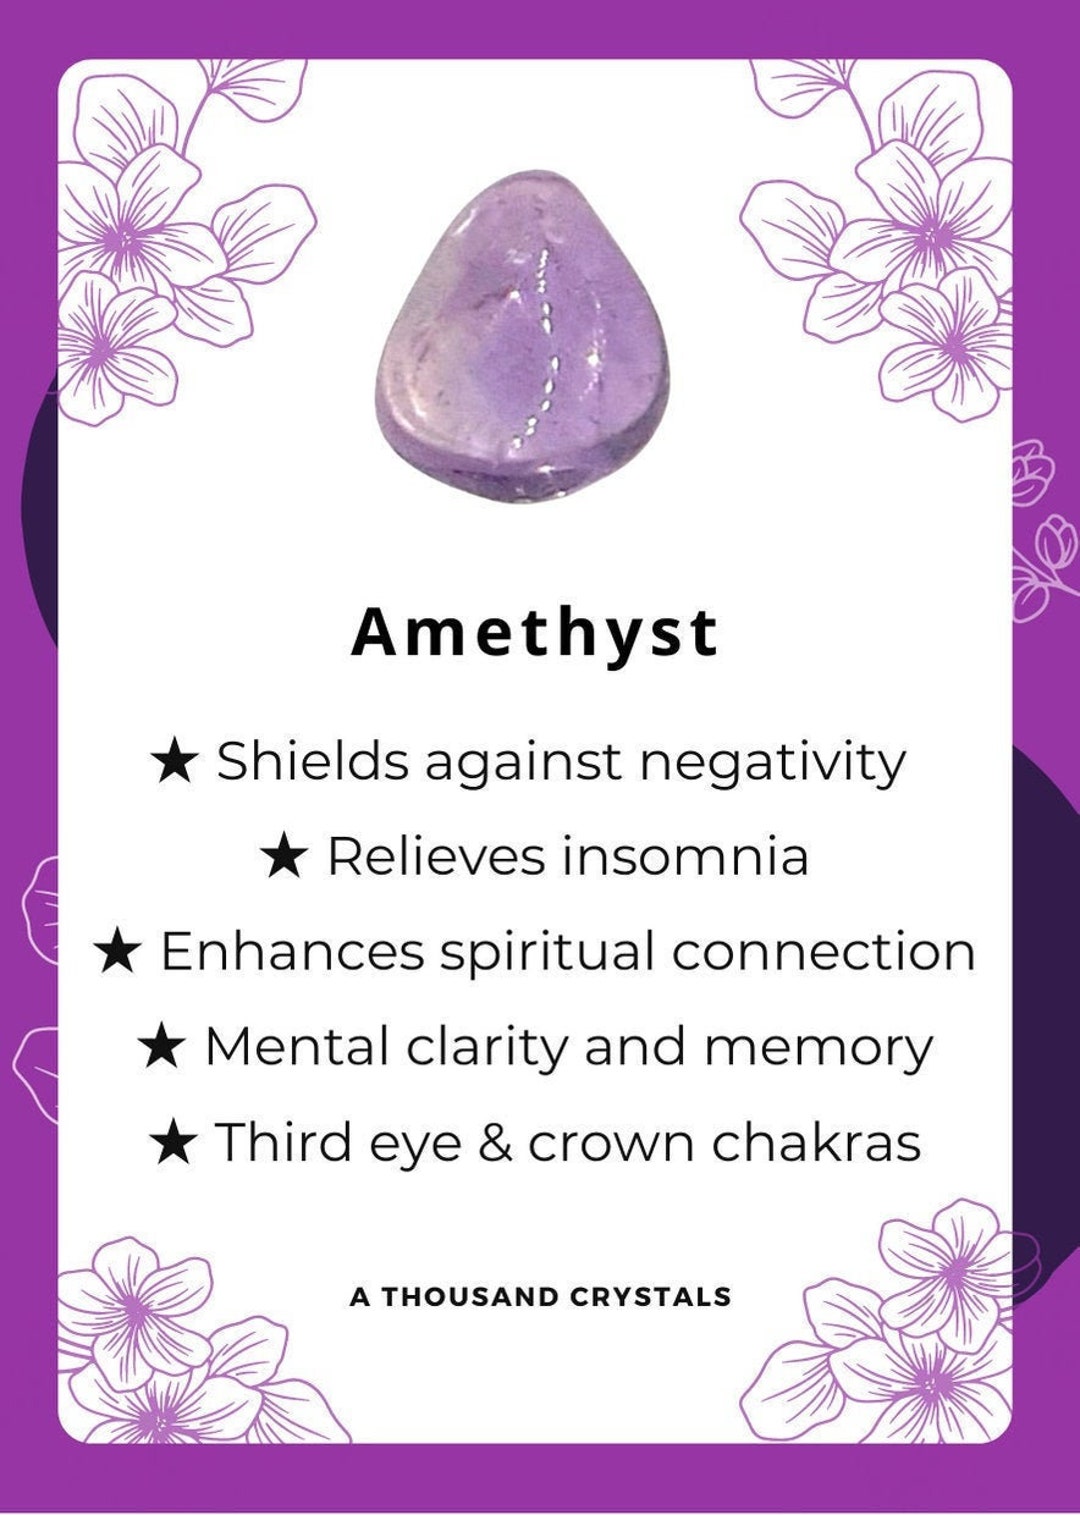 AMETHYST Printable Cards Crystal & Stone Meaning Properties Benefits  Instant Download Crystals - Etsy